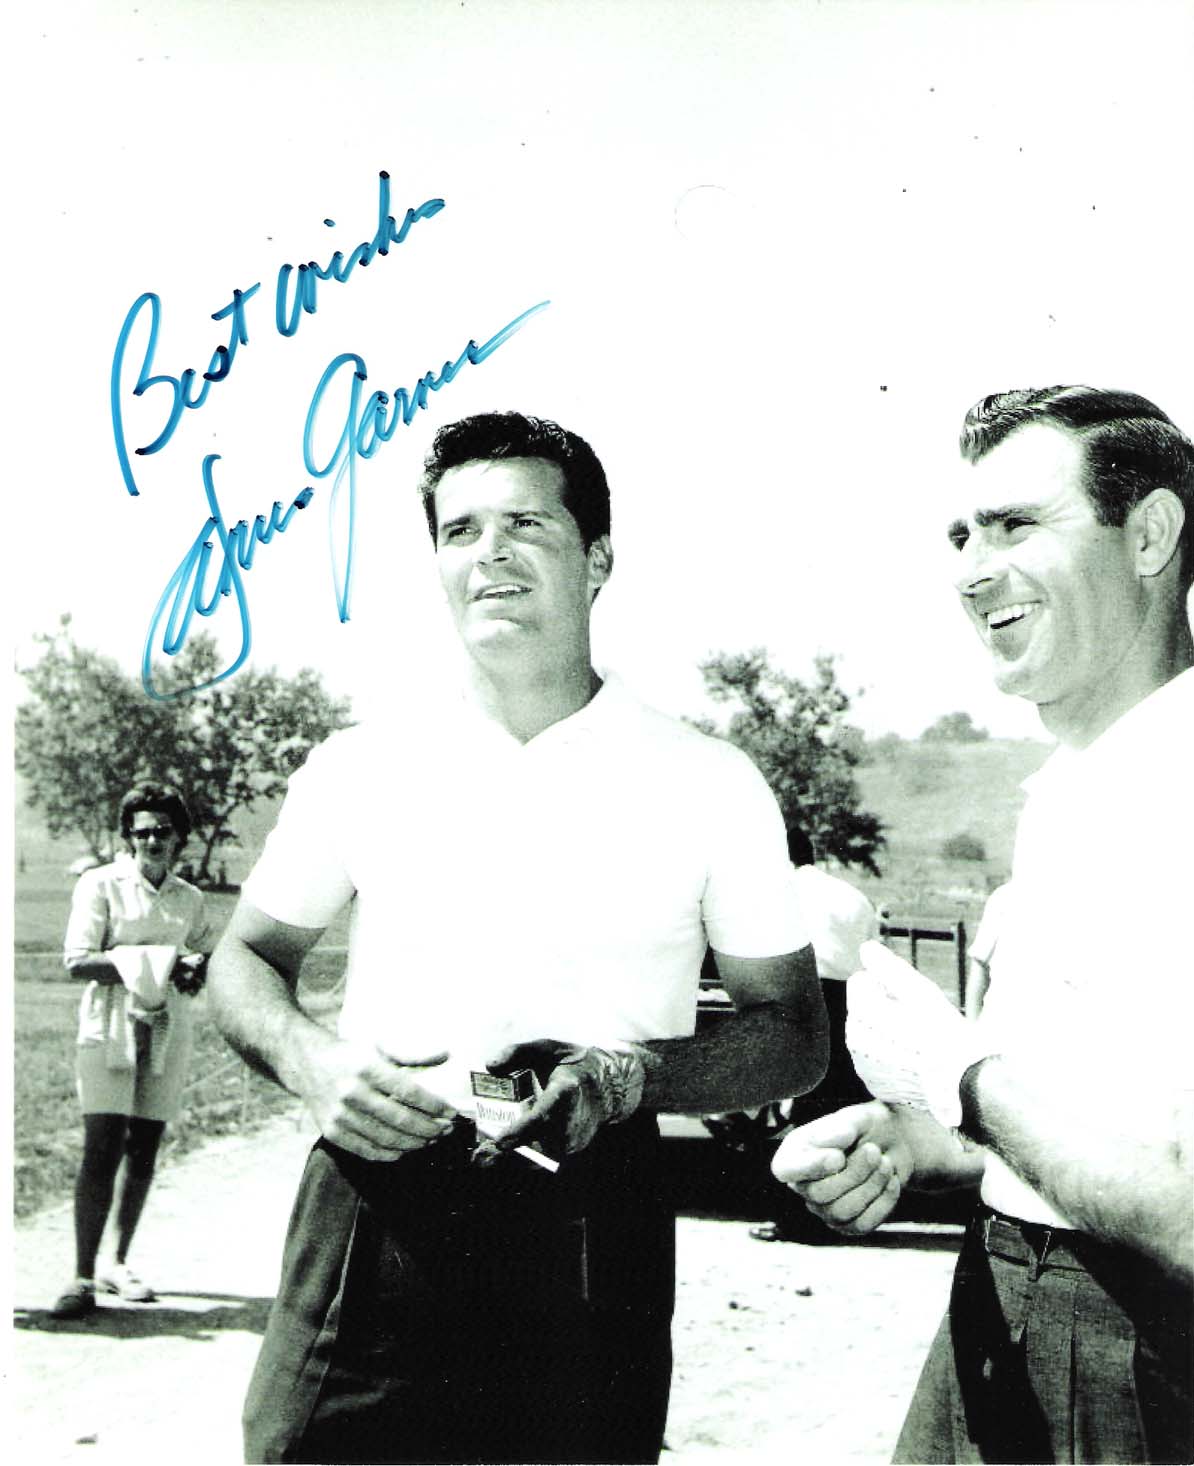 JAMES GARNER SIGNED 8x10 THE ROCKFORD FILES AUTOGRAPHED PHOTO REPRINT 